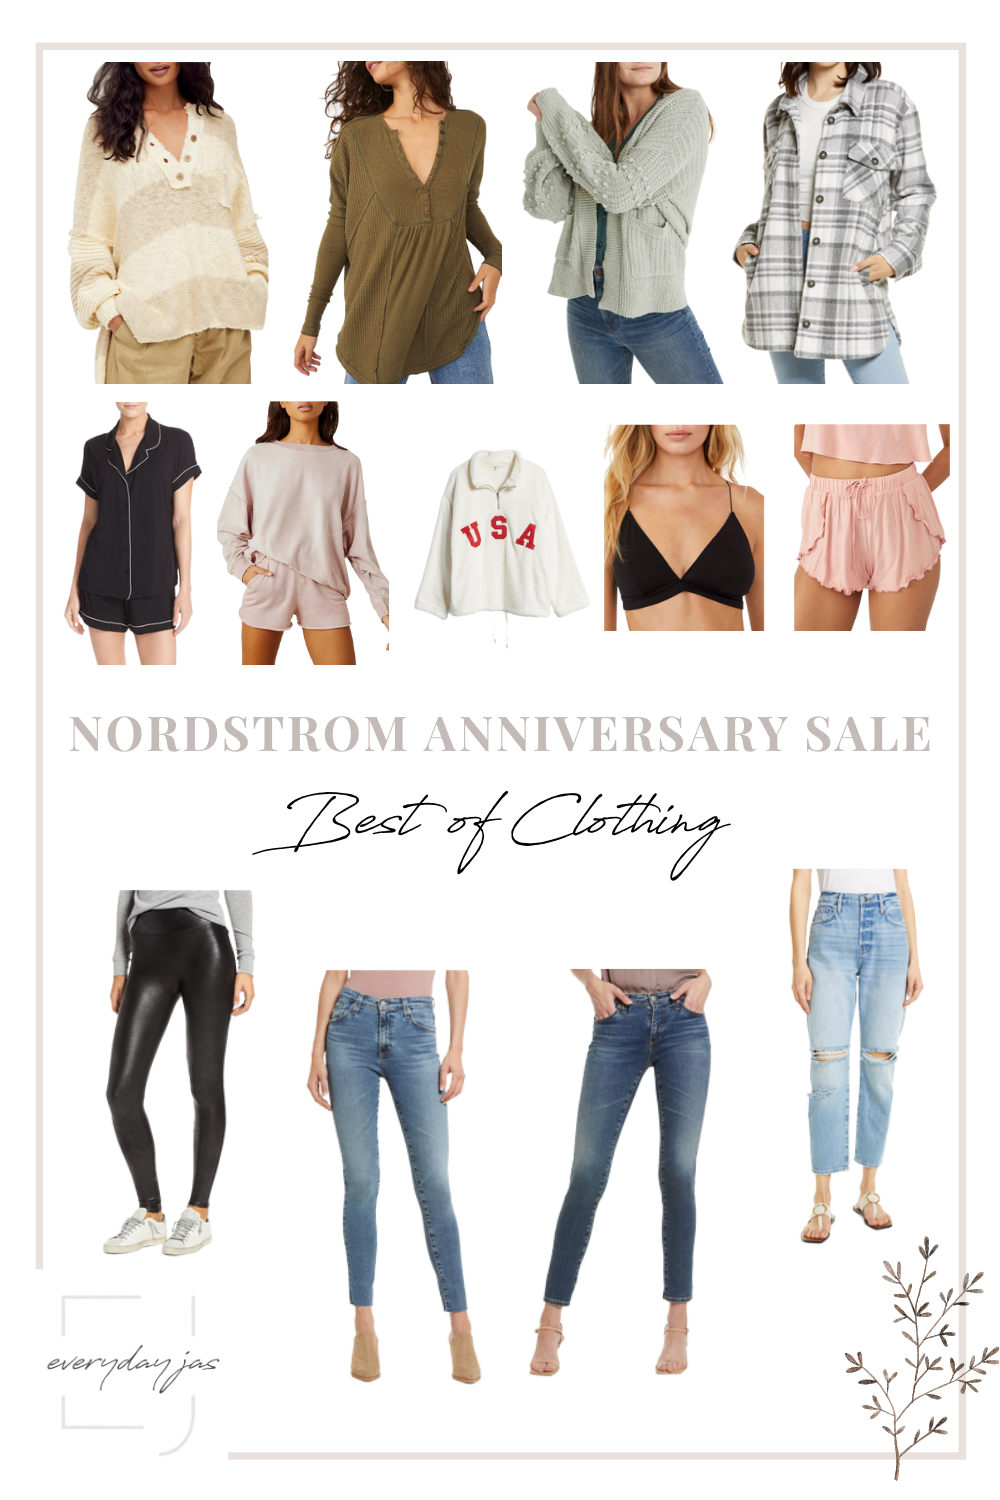 Women's Nordstrom Anniversary Sale Best of clothing